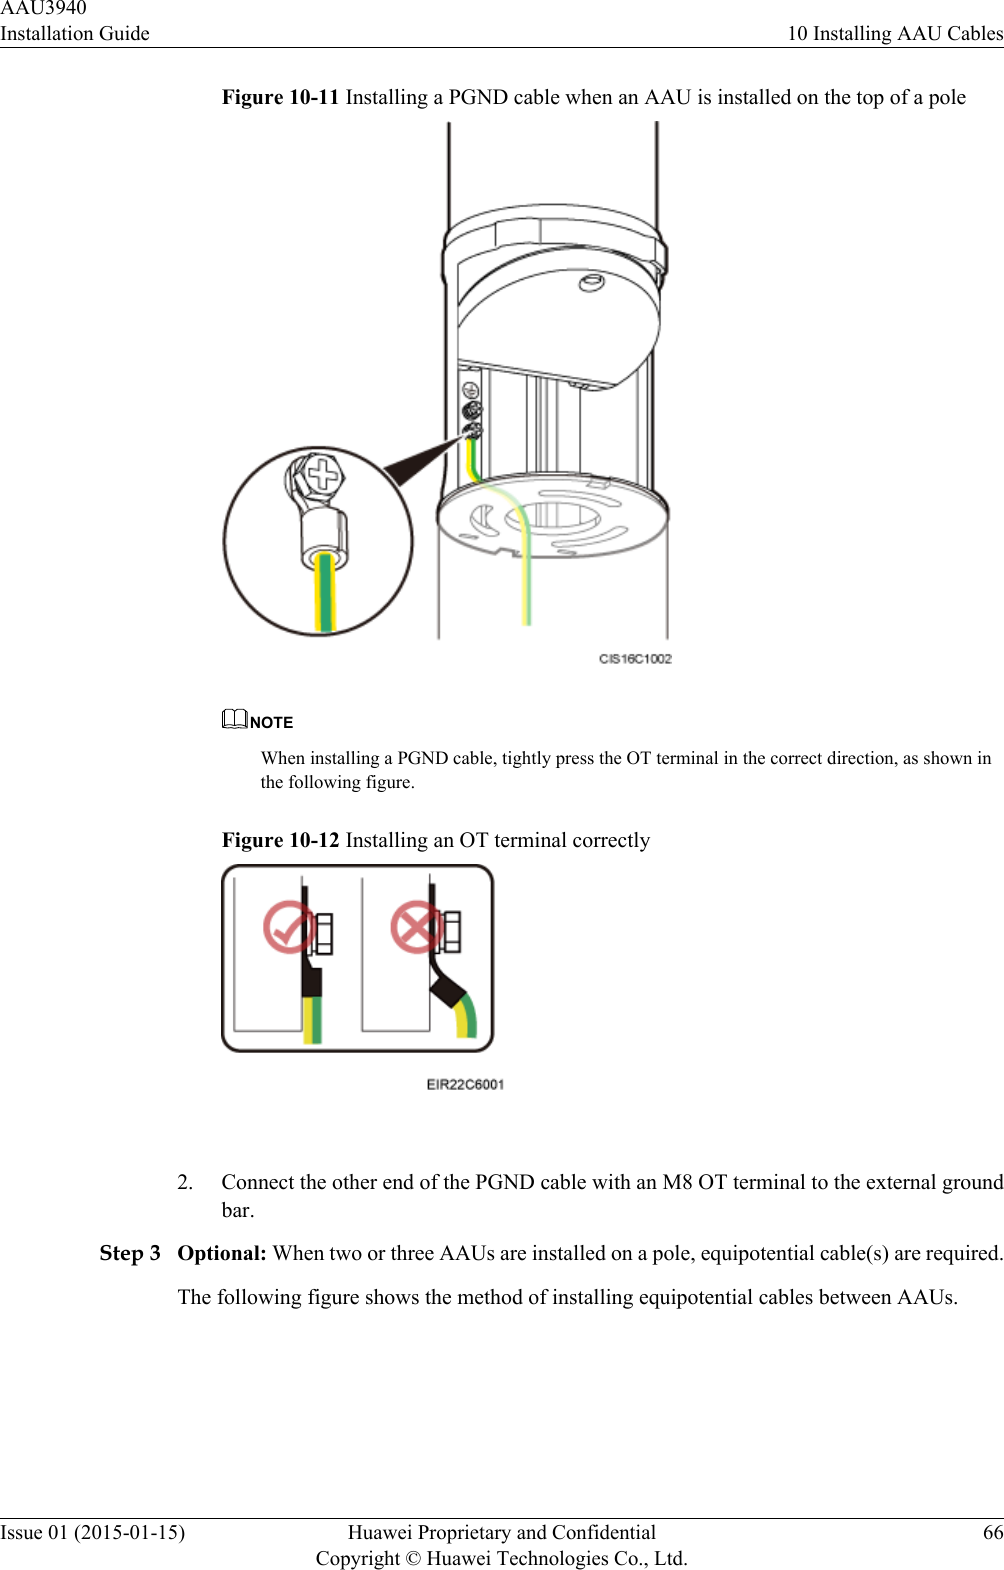 Figure 10-11 Installing a PGND cable when an AAU is installed on the top of a poleNOTEWhen installing a PGND cable, tightly press the OT terminal in the correct direction, as shown inthe following figure.Figure 10-12 Installing an OT terminal correctly 2. Connect the other end of the PGND cable with an M8 OT terminal to the external groundbar.Step 3 Optional: When two or three AAUs are installed on a pole, equipotential cable(s) are required.The following figure shows the method of installing equipotential cables between AAUs.AAU3940Installation Guide 10 Installing AAU CablesIssue 01 (2015-01-15) Huawei Proprietary and ConfidentialCopyright © Huawei Technologies Co., Ltd.66